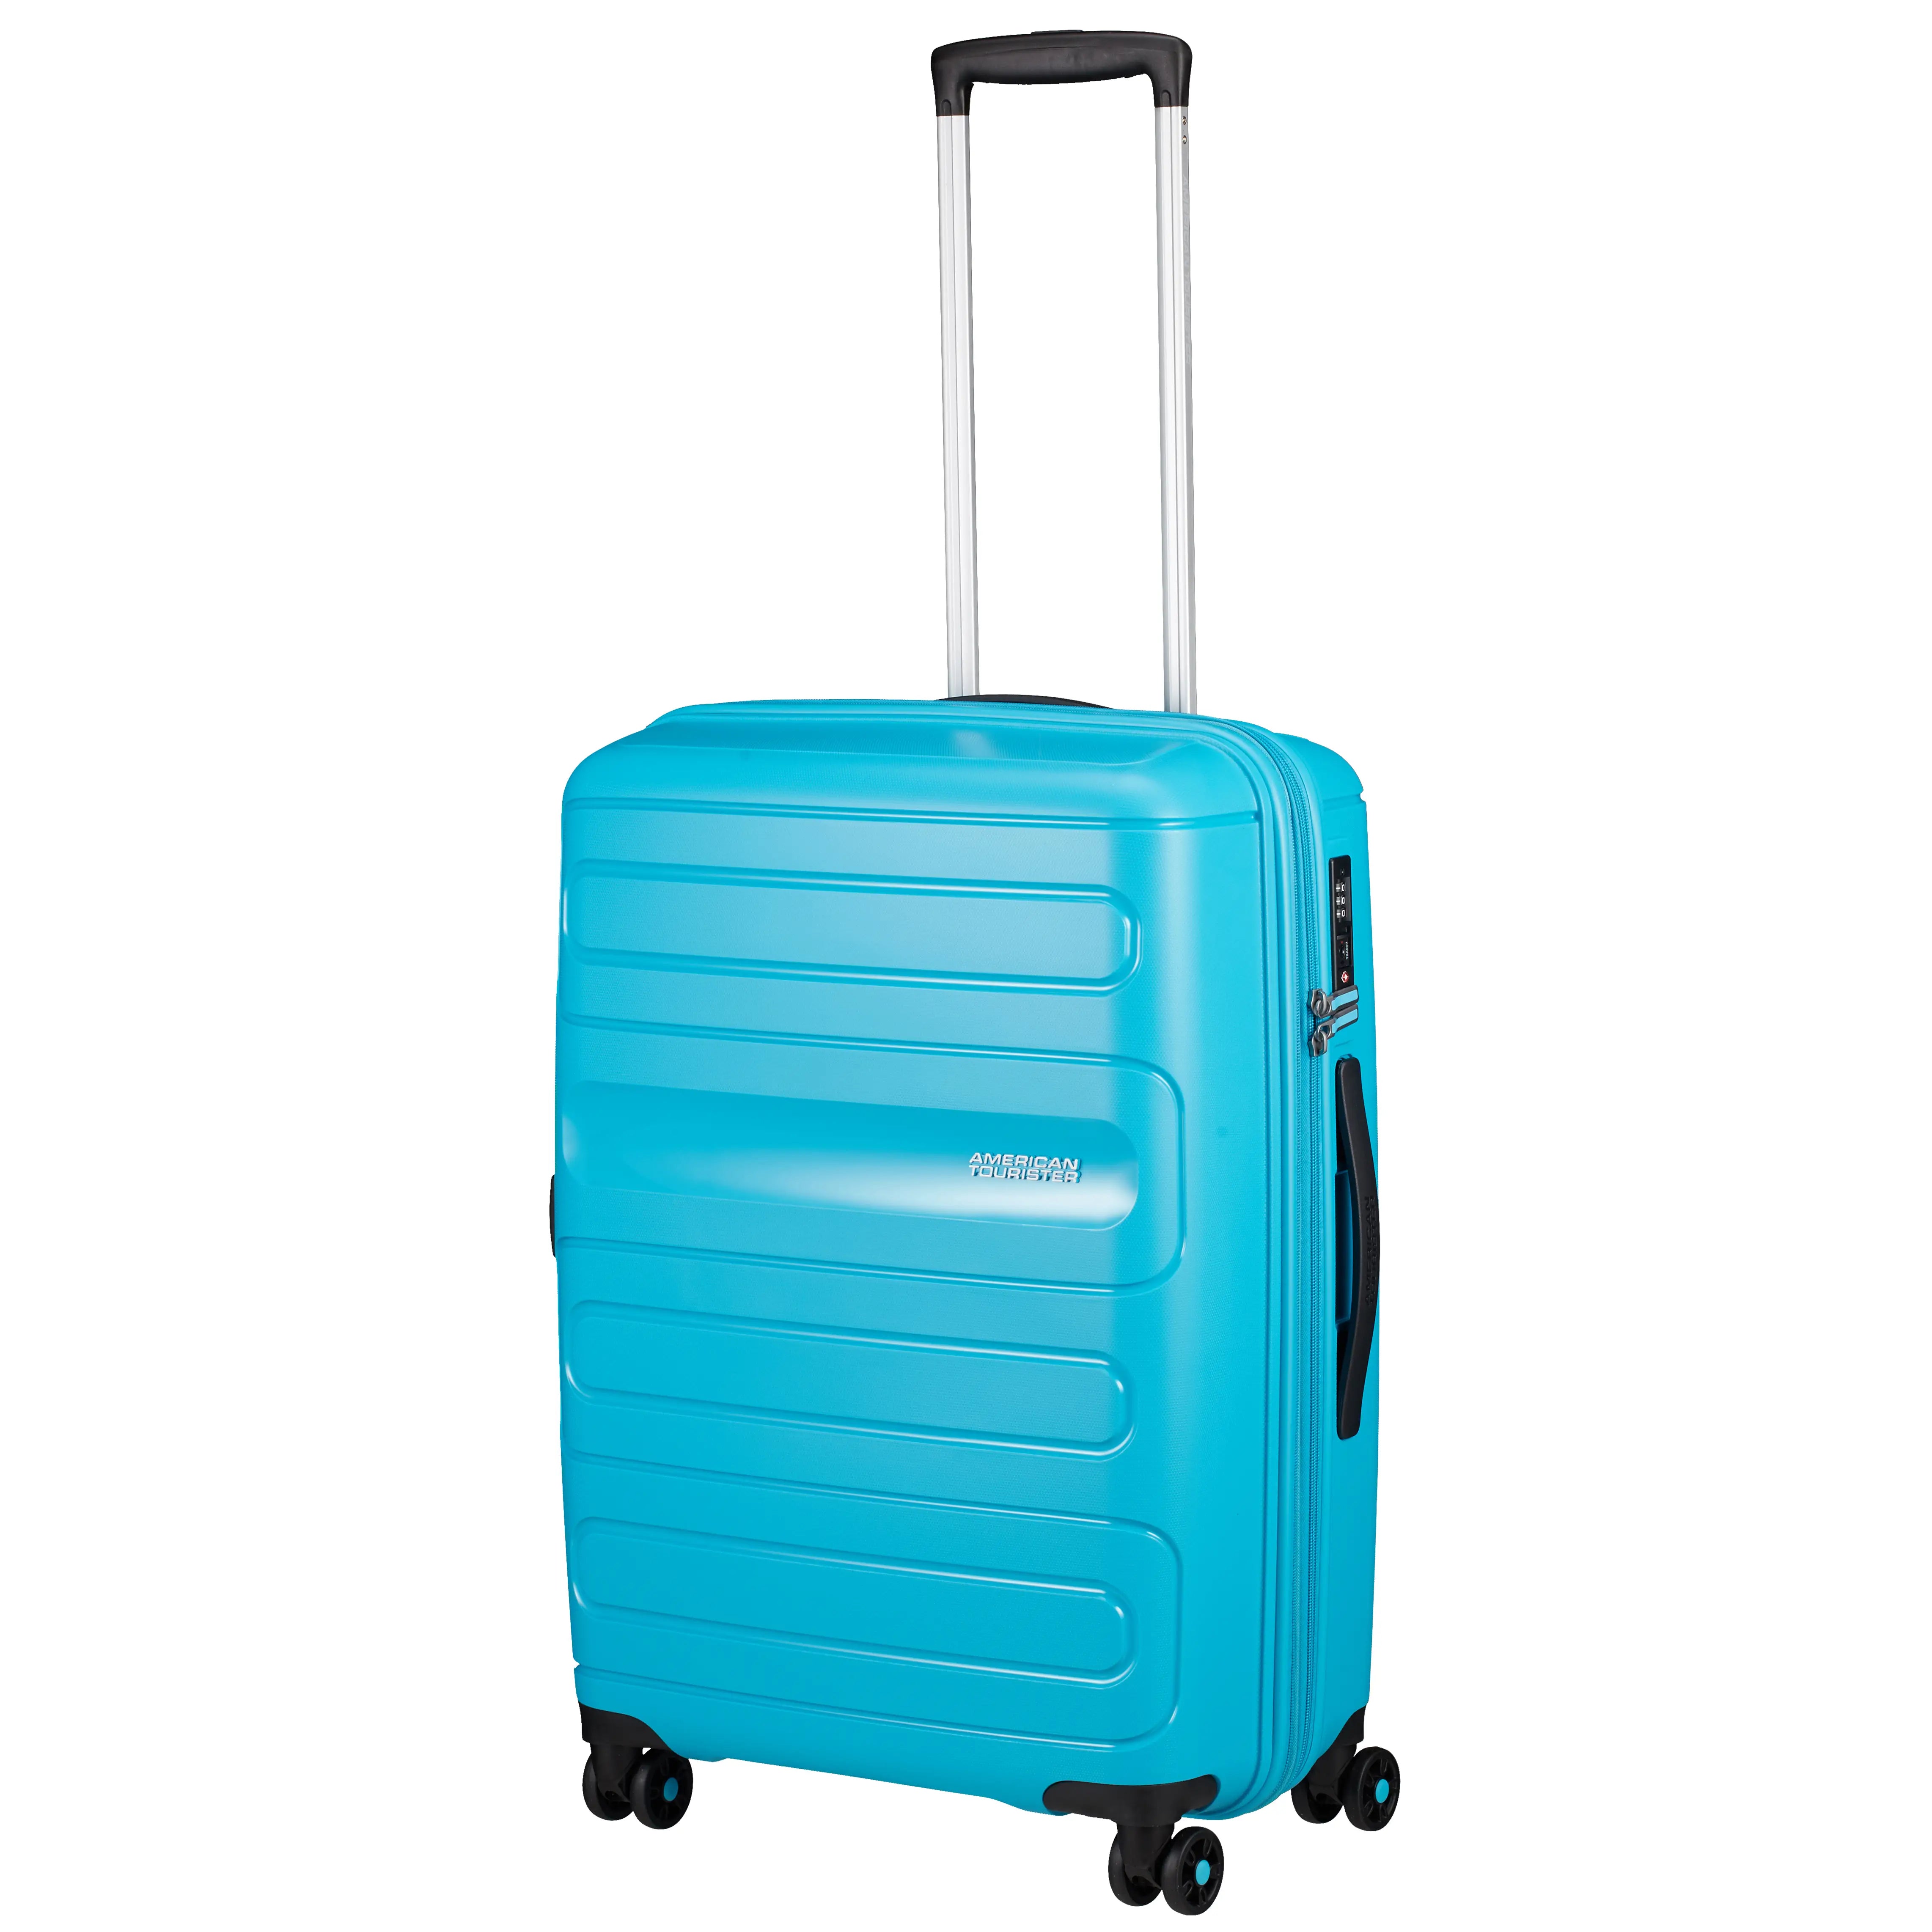 American Tourister Sunside 4-Rollen-Trolley 68 cm - Totally Teal